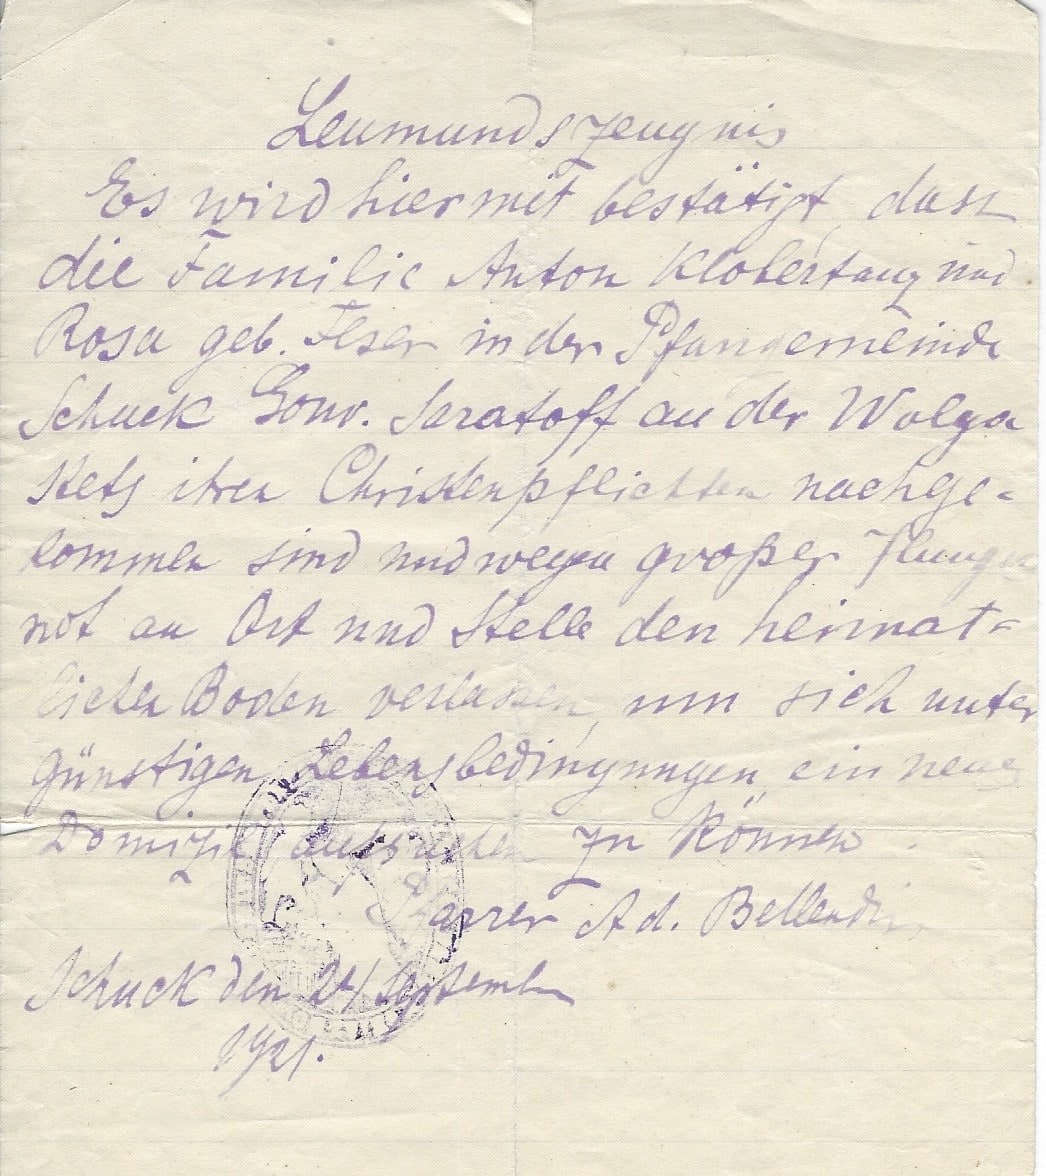 Letter of Reference: It is herewith certified that the family of Anton Klobertanz and his wife Rosa nee Feser are members of the Schuck Roman-Catholic church and have always fulfilled their Christian duties. Because of the famine here they have to leave their native land and would like to look for a better place of living under favorable living conditions. Schuck (Gryaznovatka), Saratov Province September 24, 1921 Pastor Ad. Bellendir Translated by Mila Koretnikova. Courtesy of Roz Rockweit.